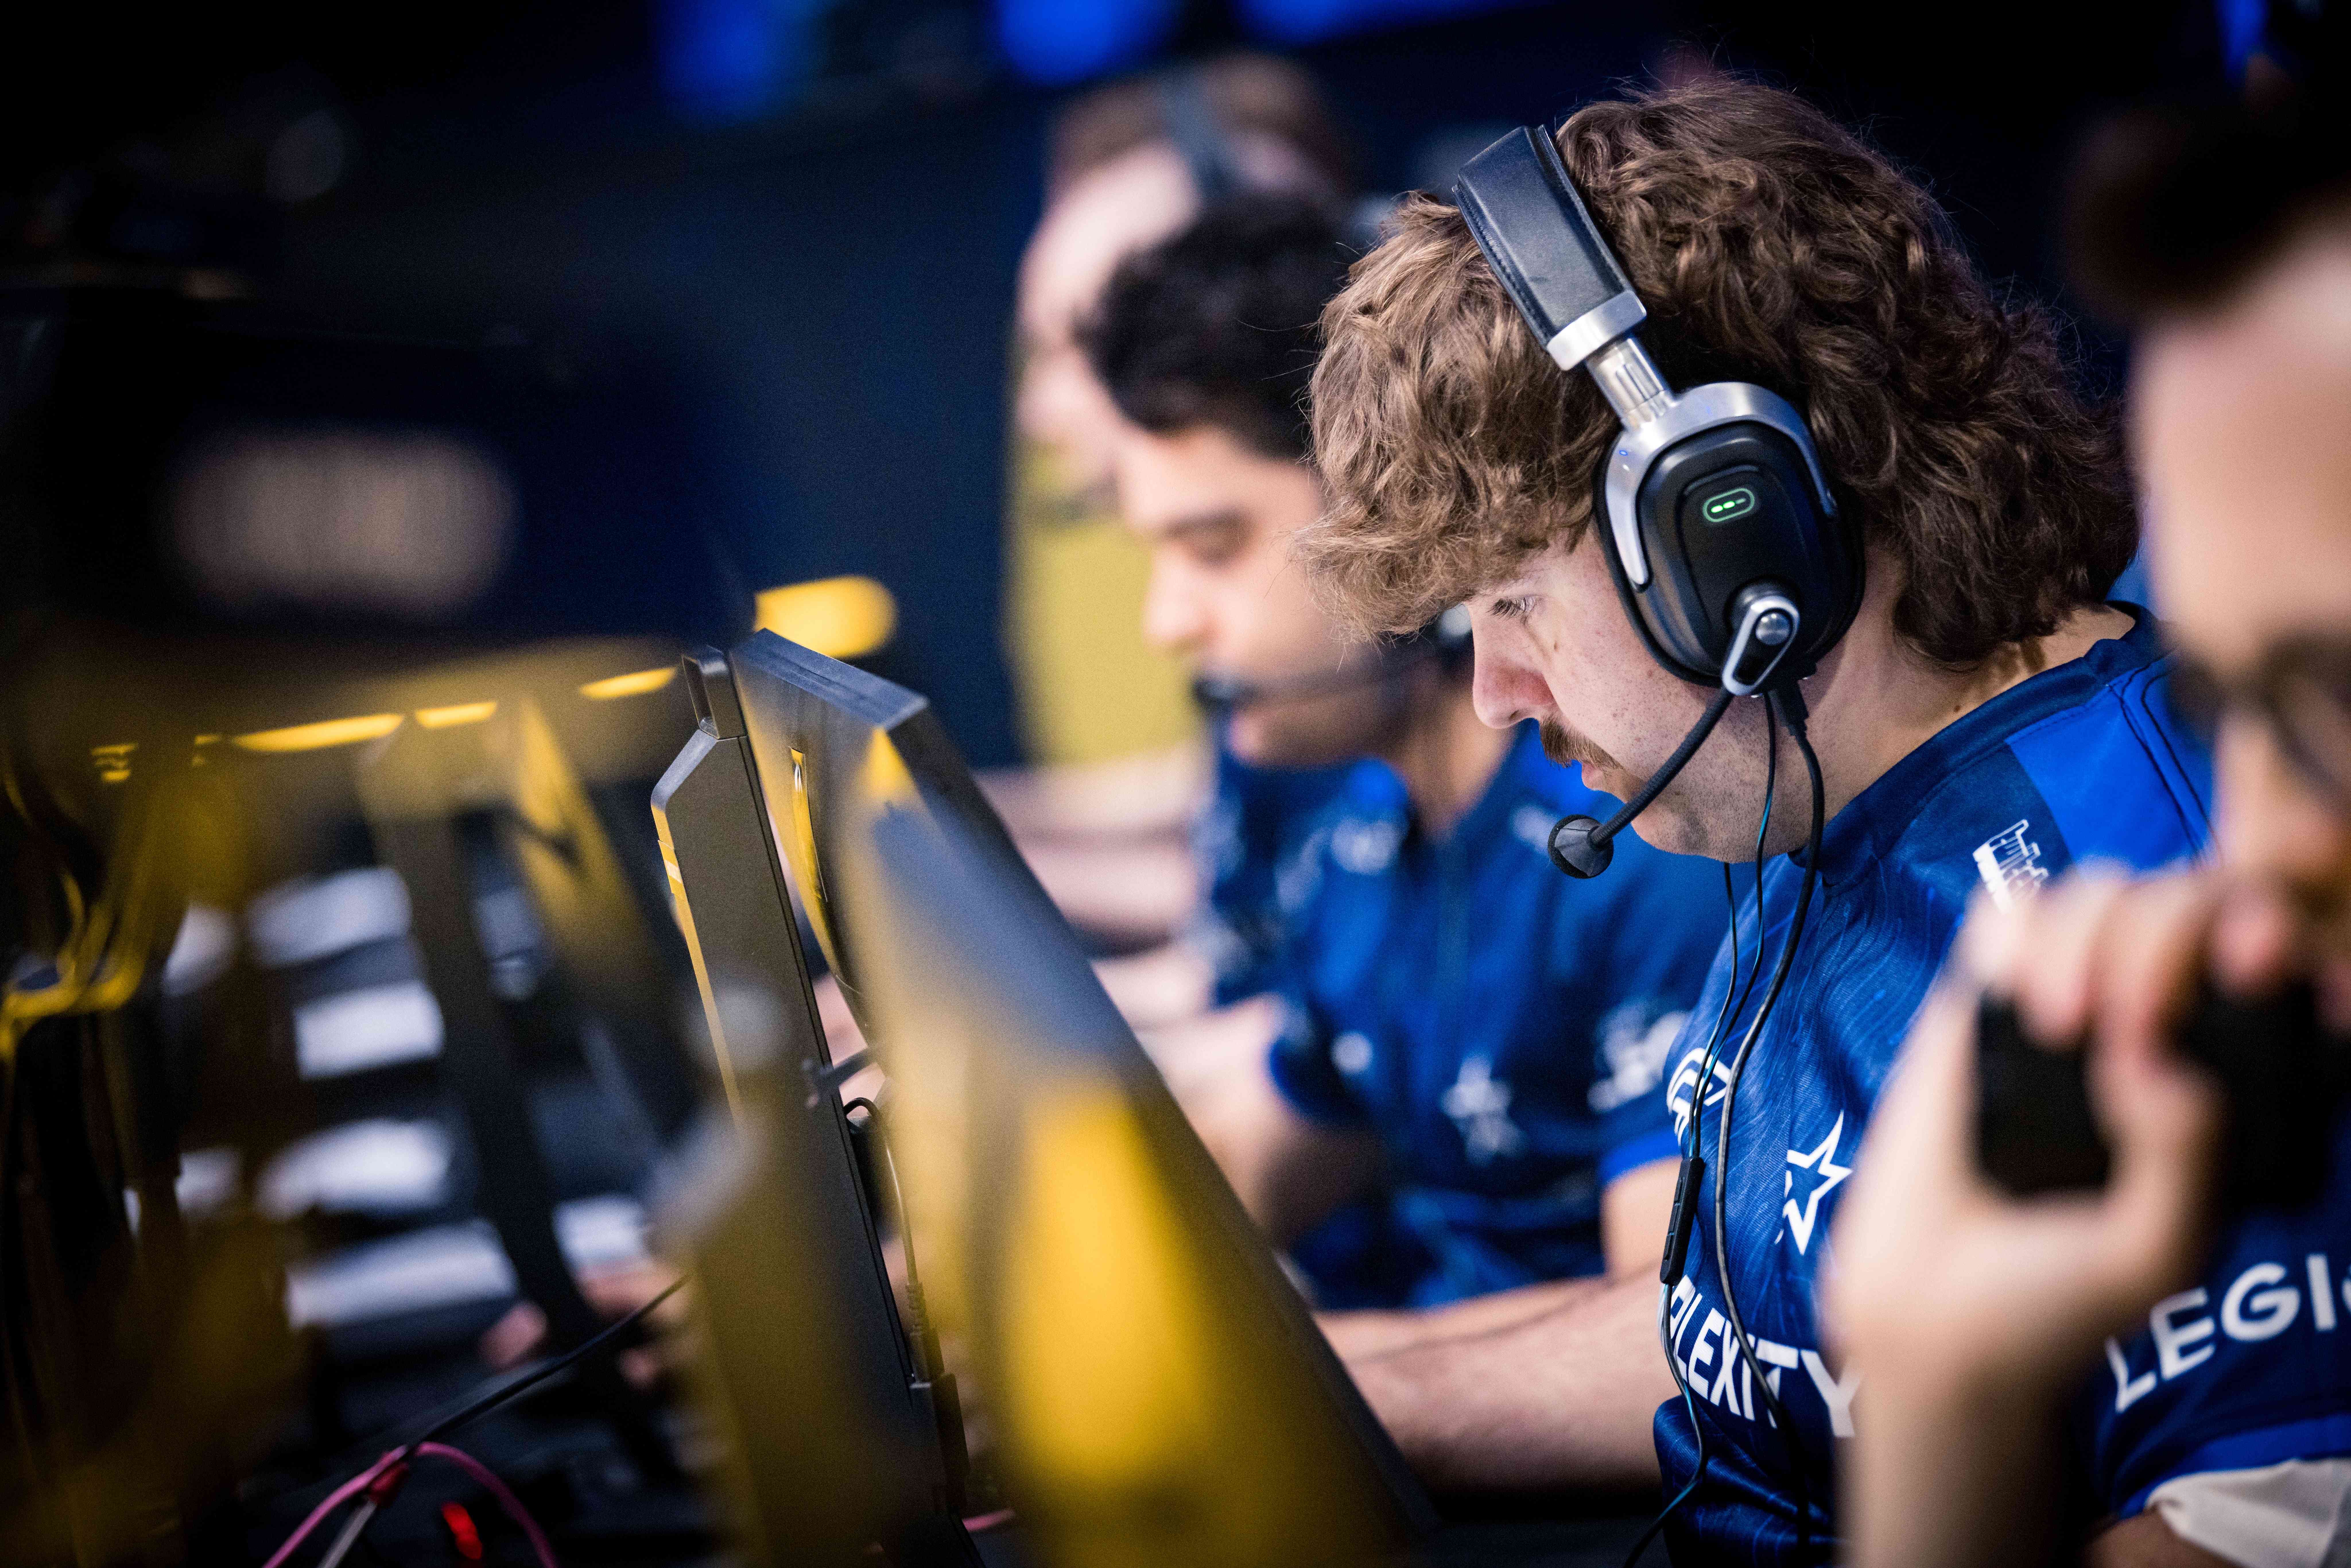 Complexity failed to progress through the Play-In at IEM Cologne after losses to fnatic and OG